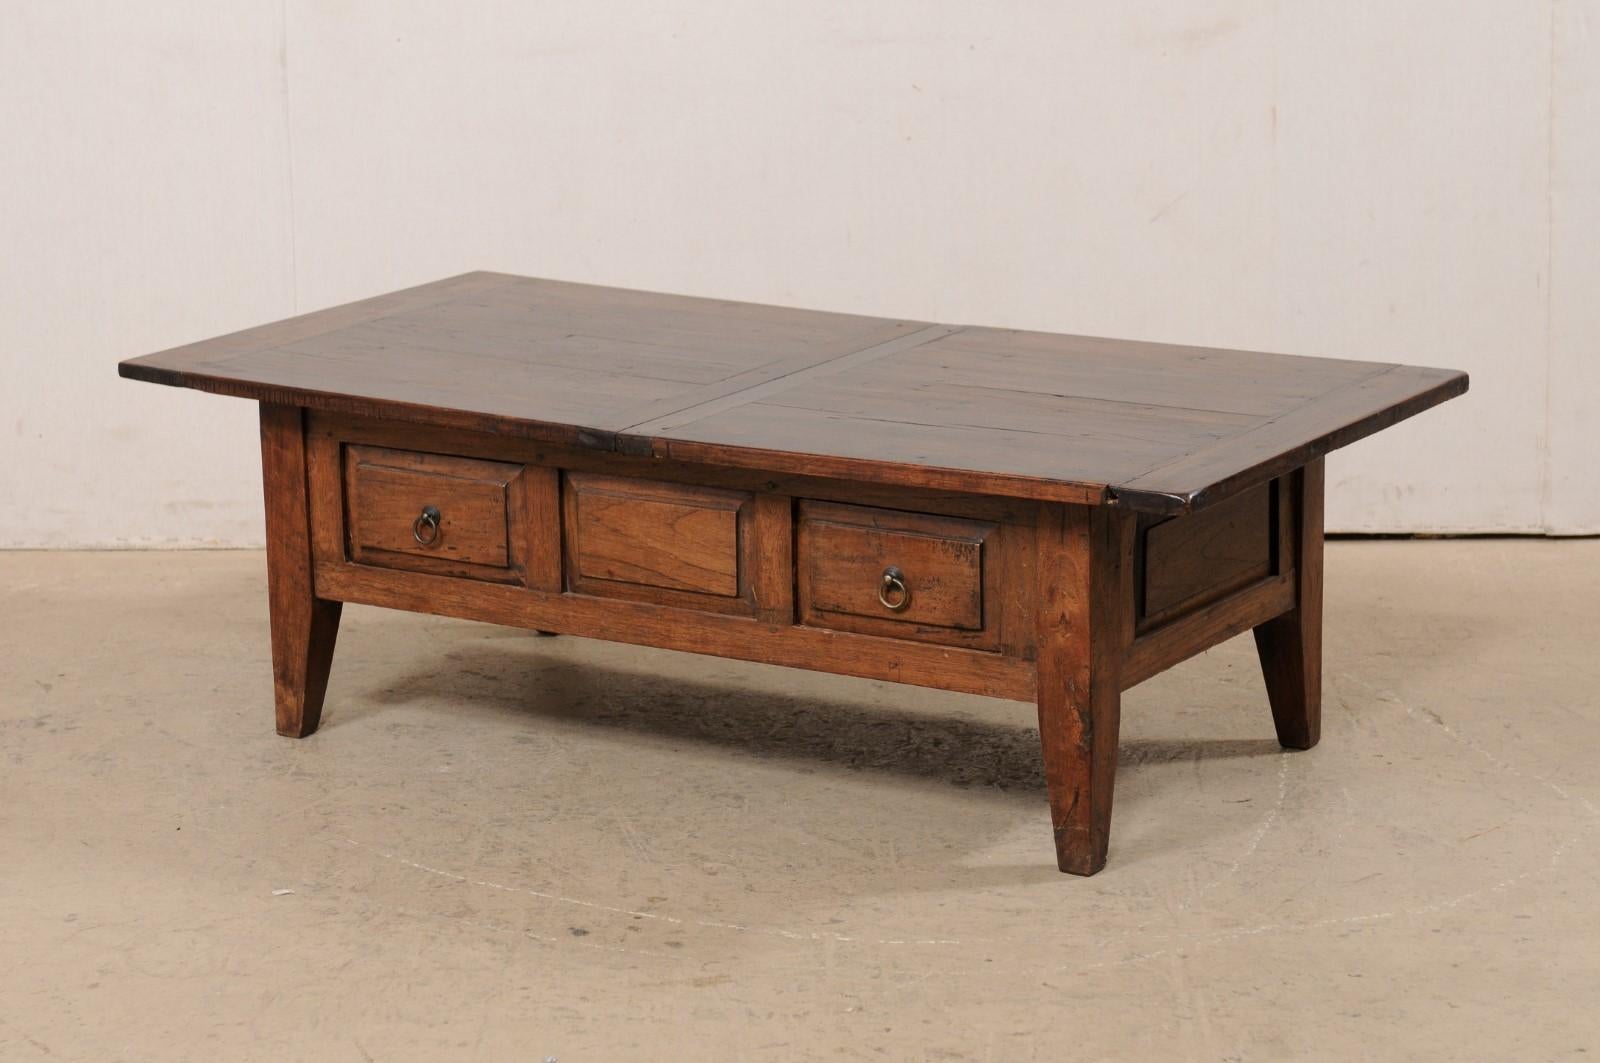 French Fruitwood Coffee Table in Rectangular-Shape w/Storage, Early 20th Century For Sale 9